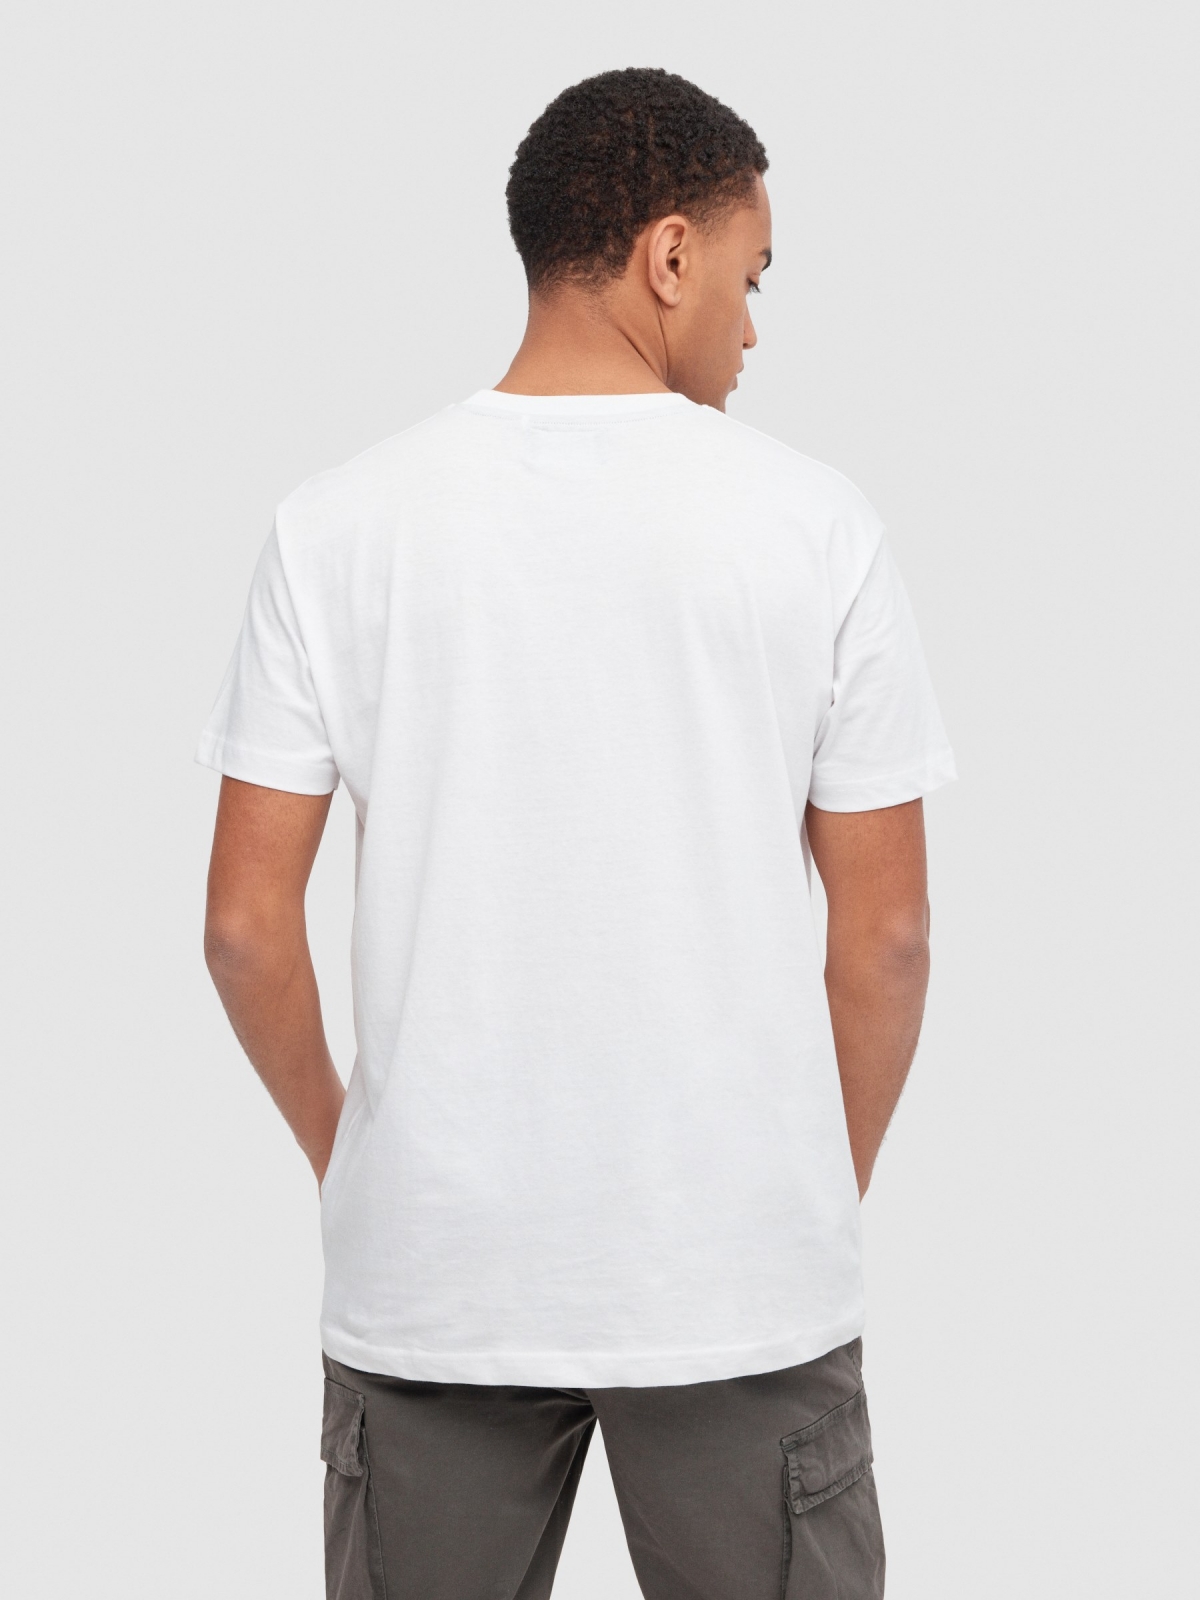 Basic T-shirt white middle back view